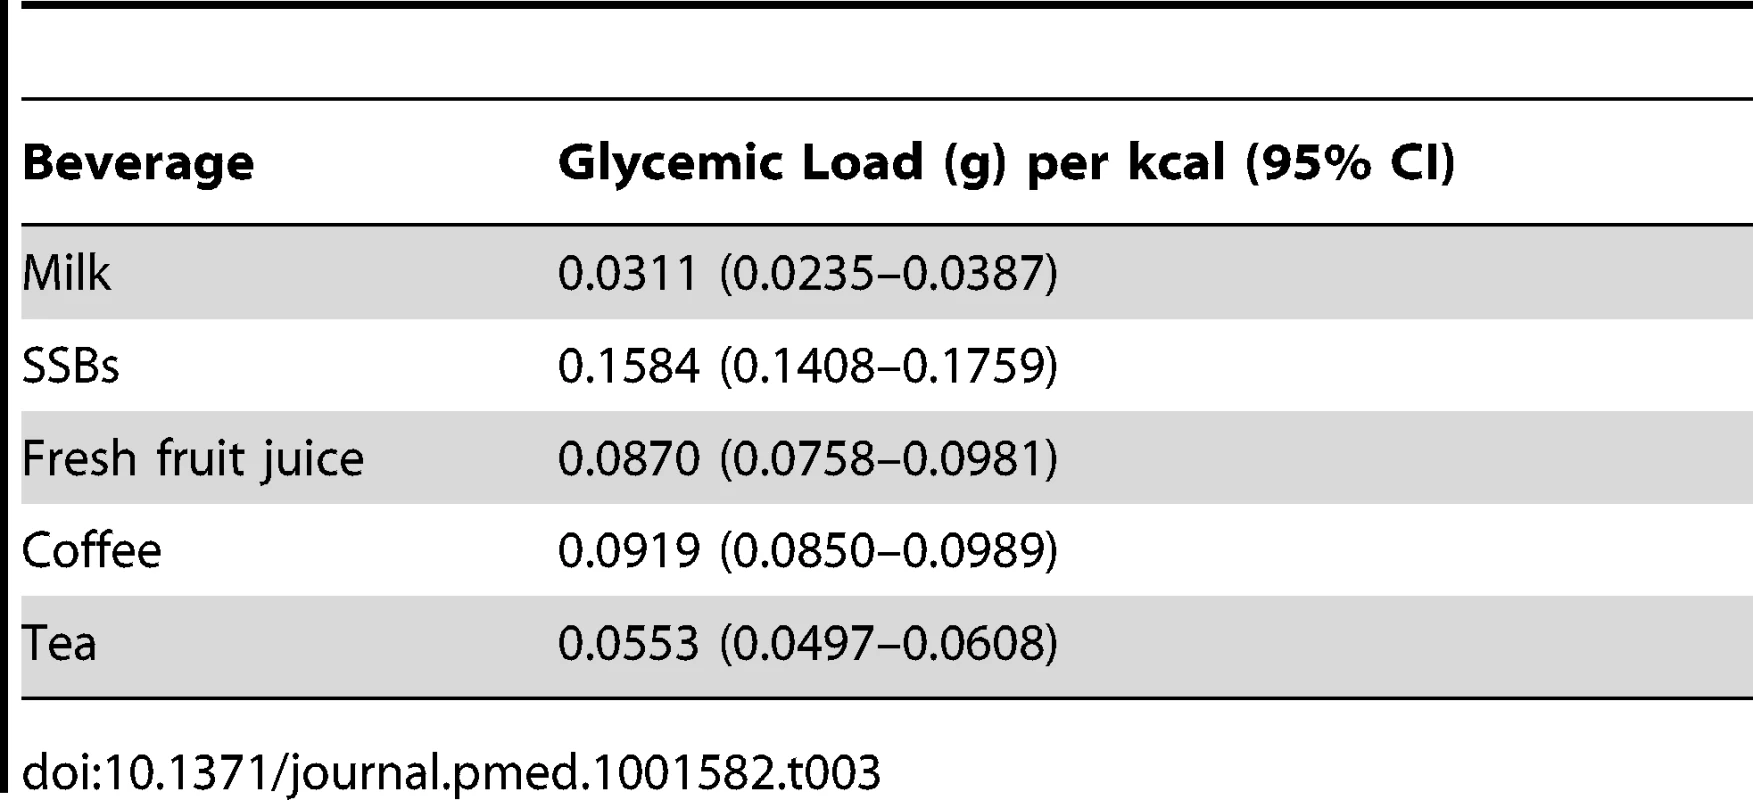 Effective glycemic load (g) per kcal when accounting for typical serving sizes (g) and energy content (kcals) of beverages &lt;em class=&quot;ref&quot;&gt;[45]&lt;/em&gt;.